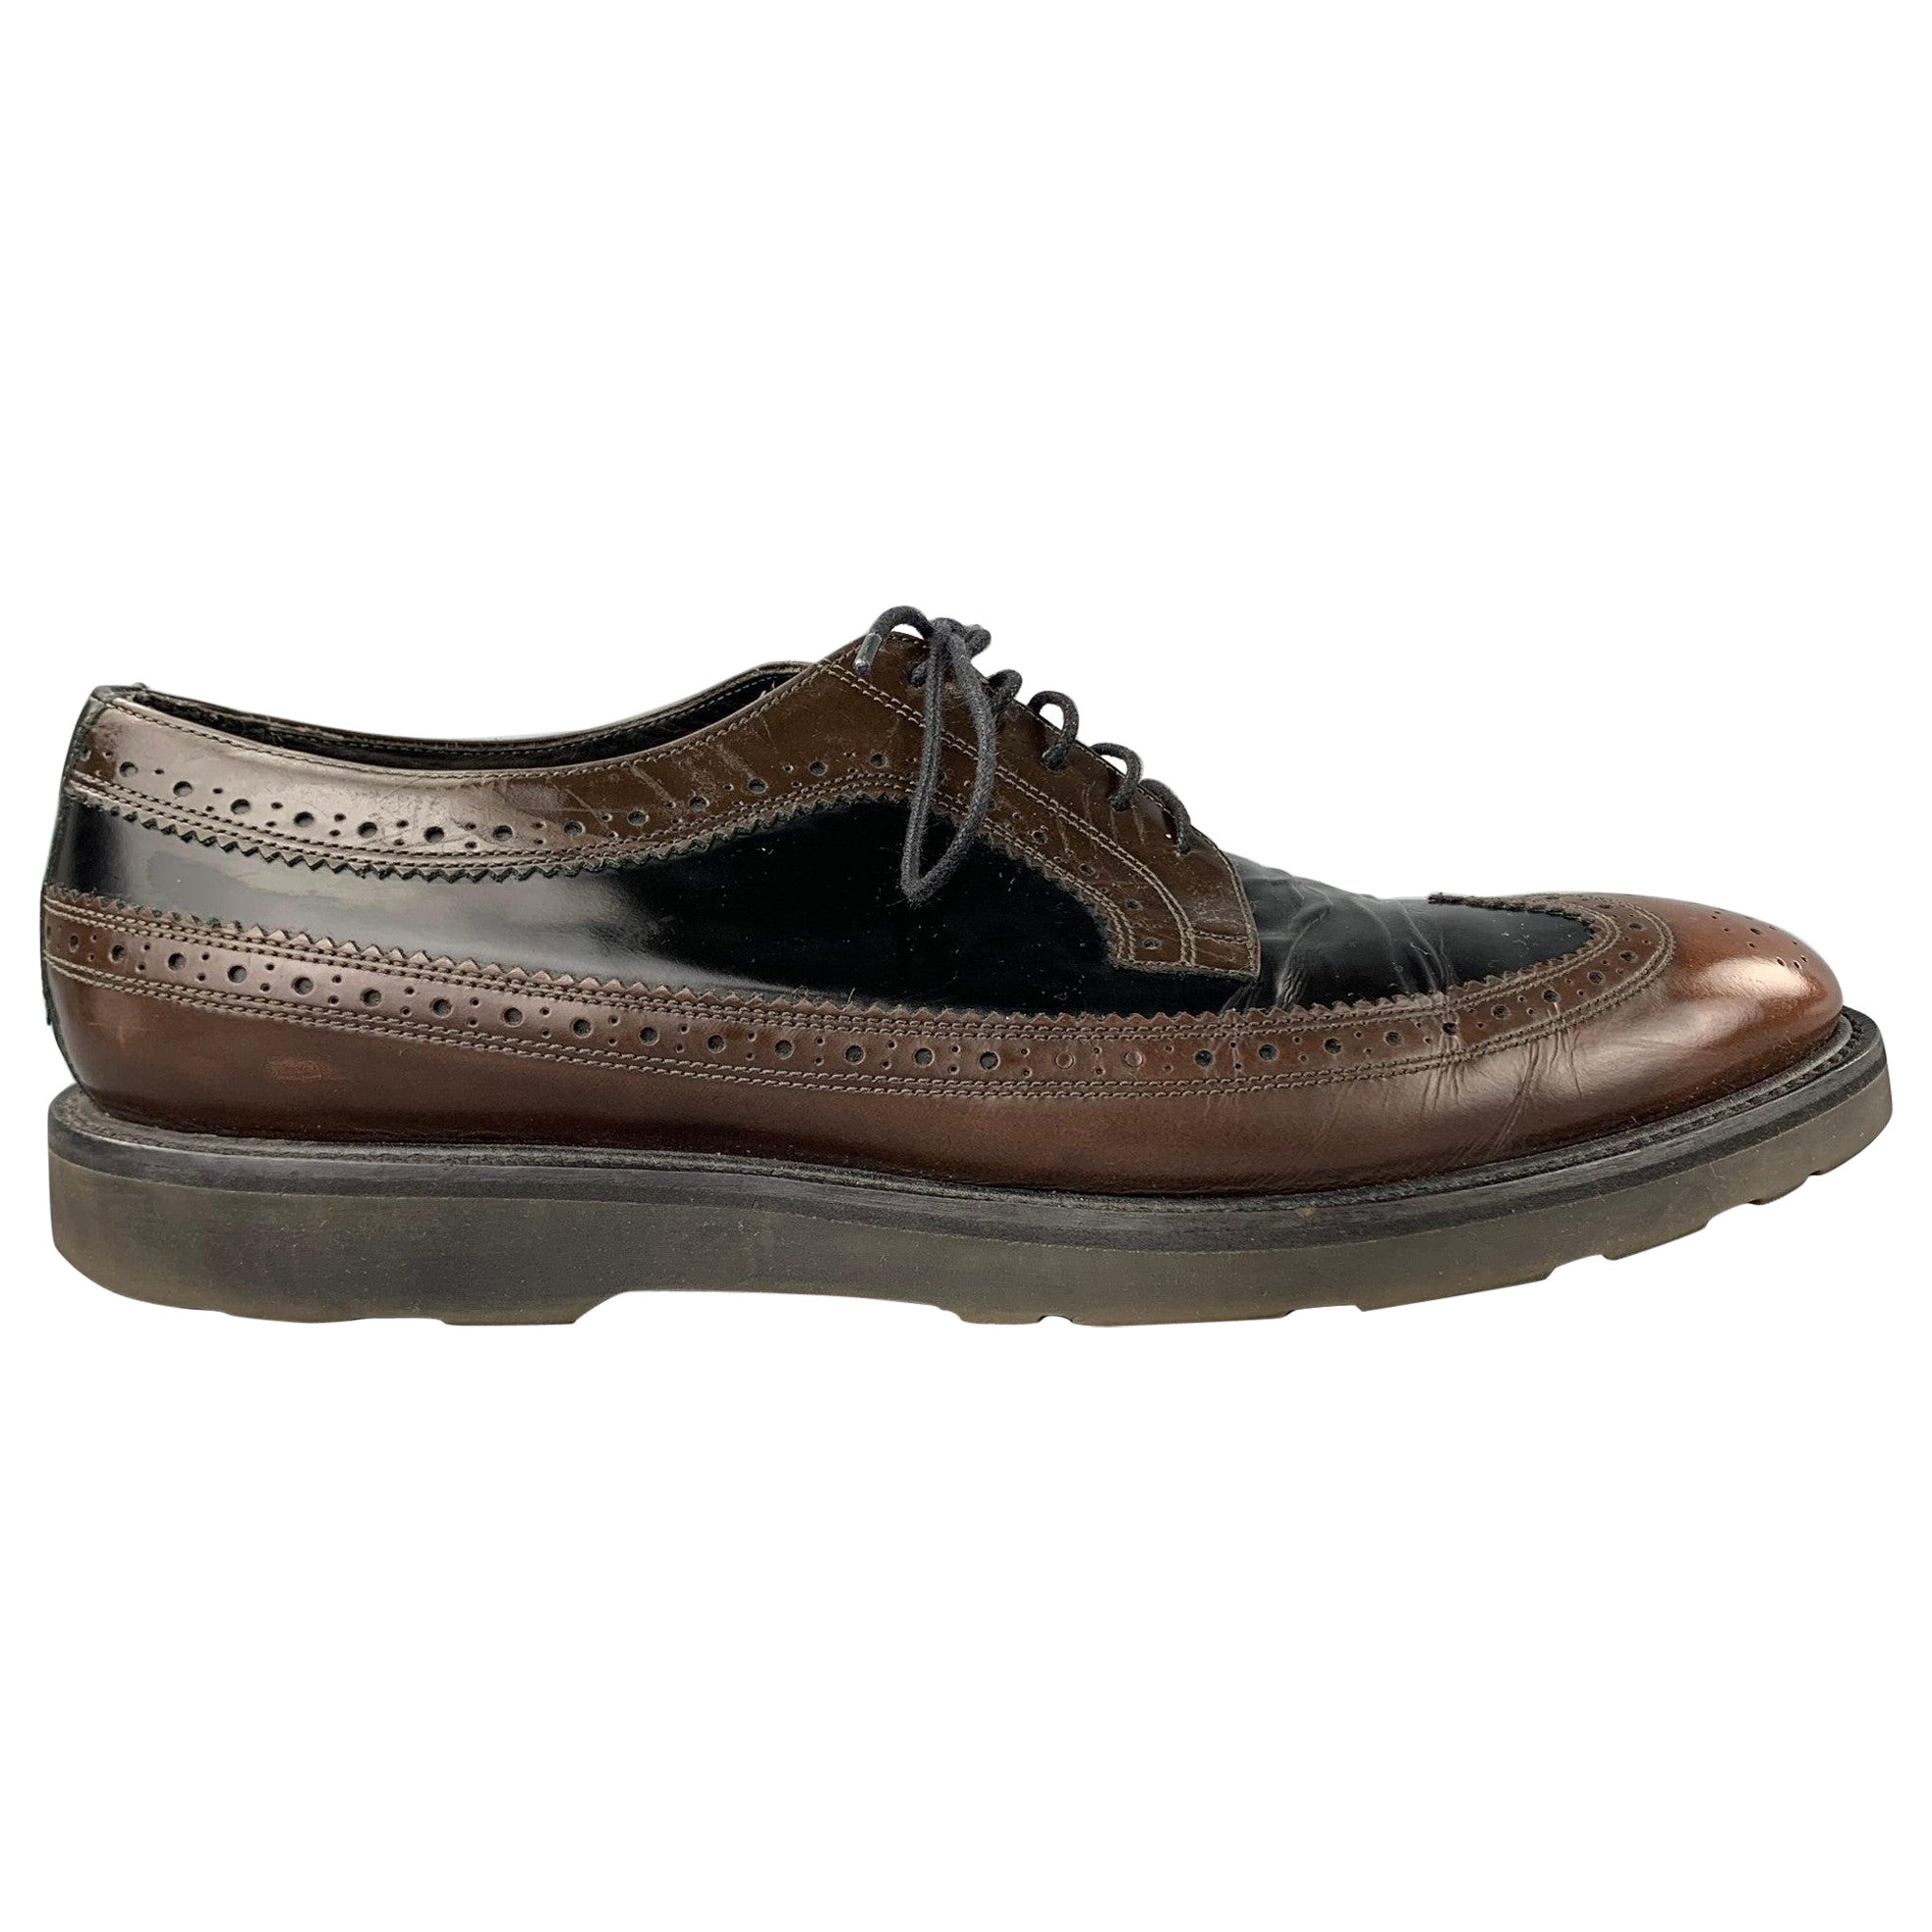 PAUL SMITH Size 10.5 Black Perforated Leather Wingtip Brown Lace Up Shoes For Sale